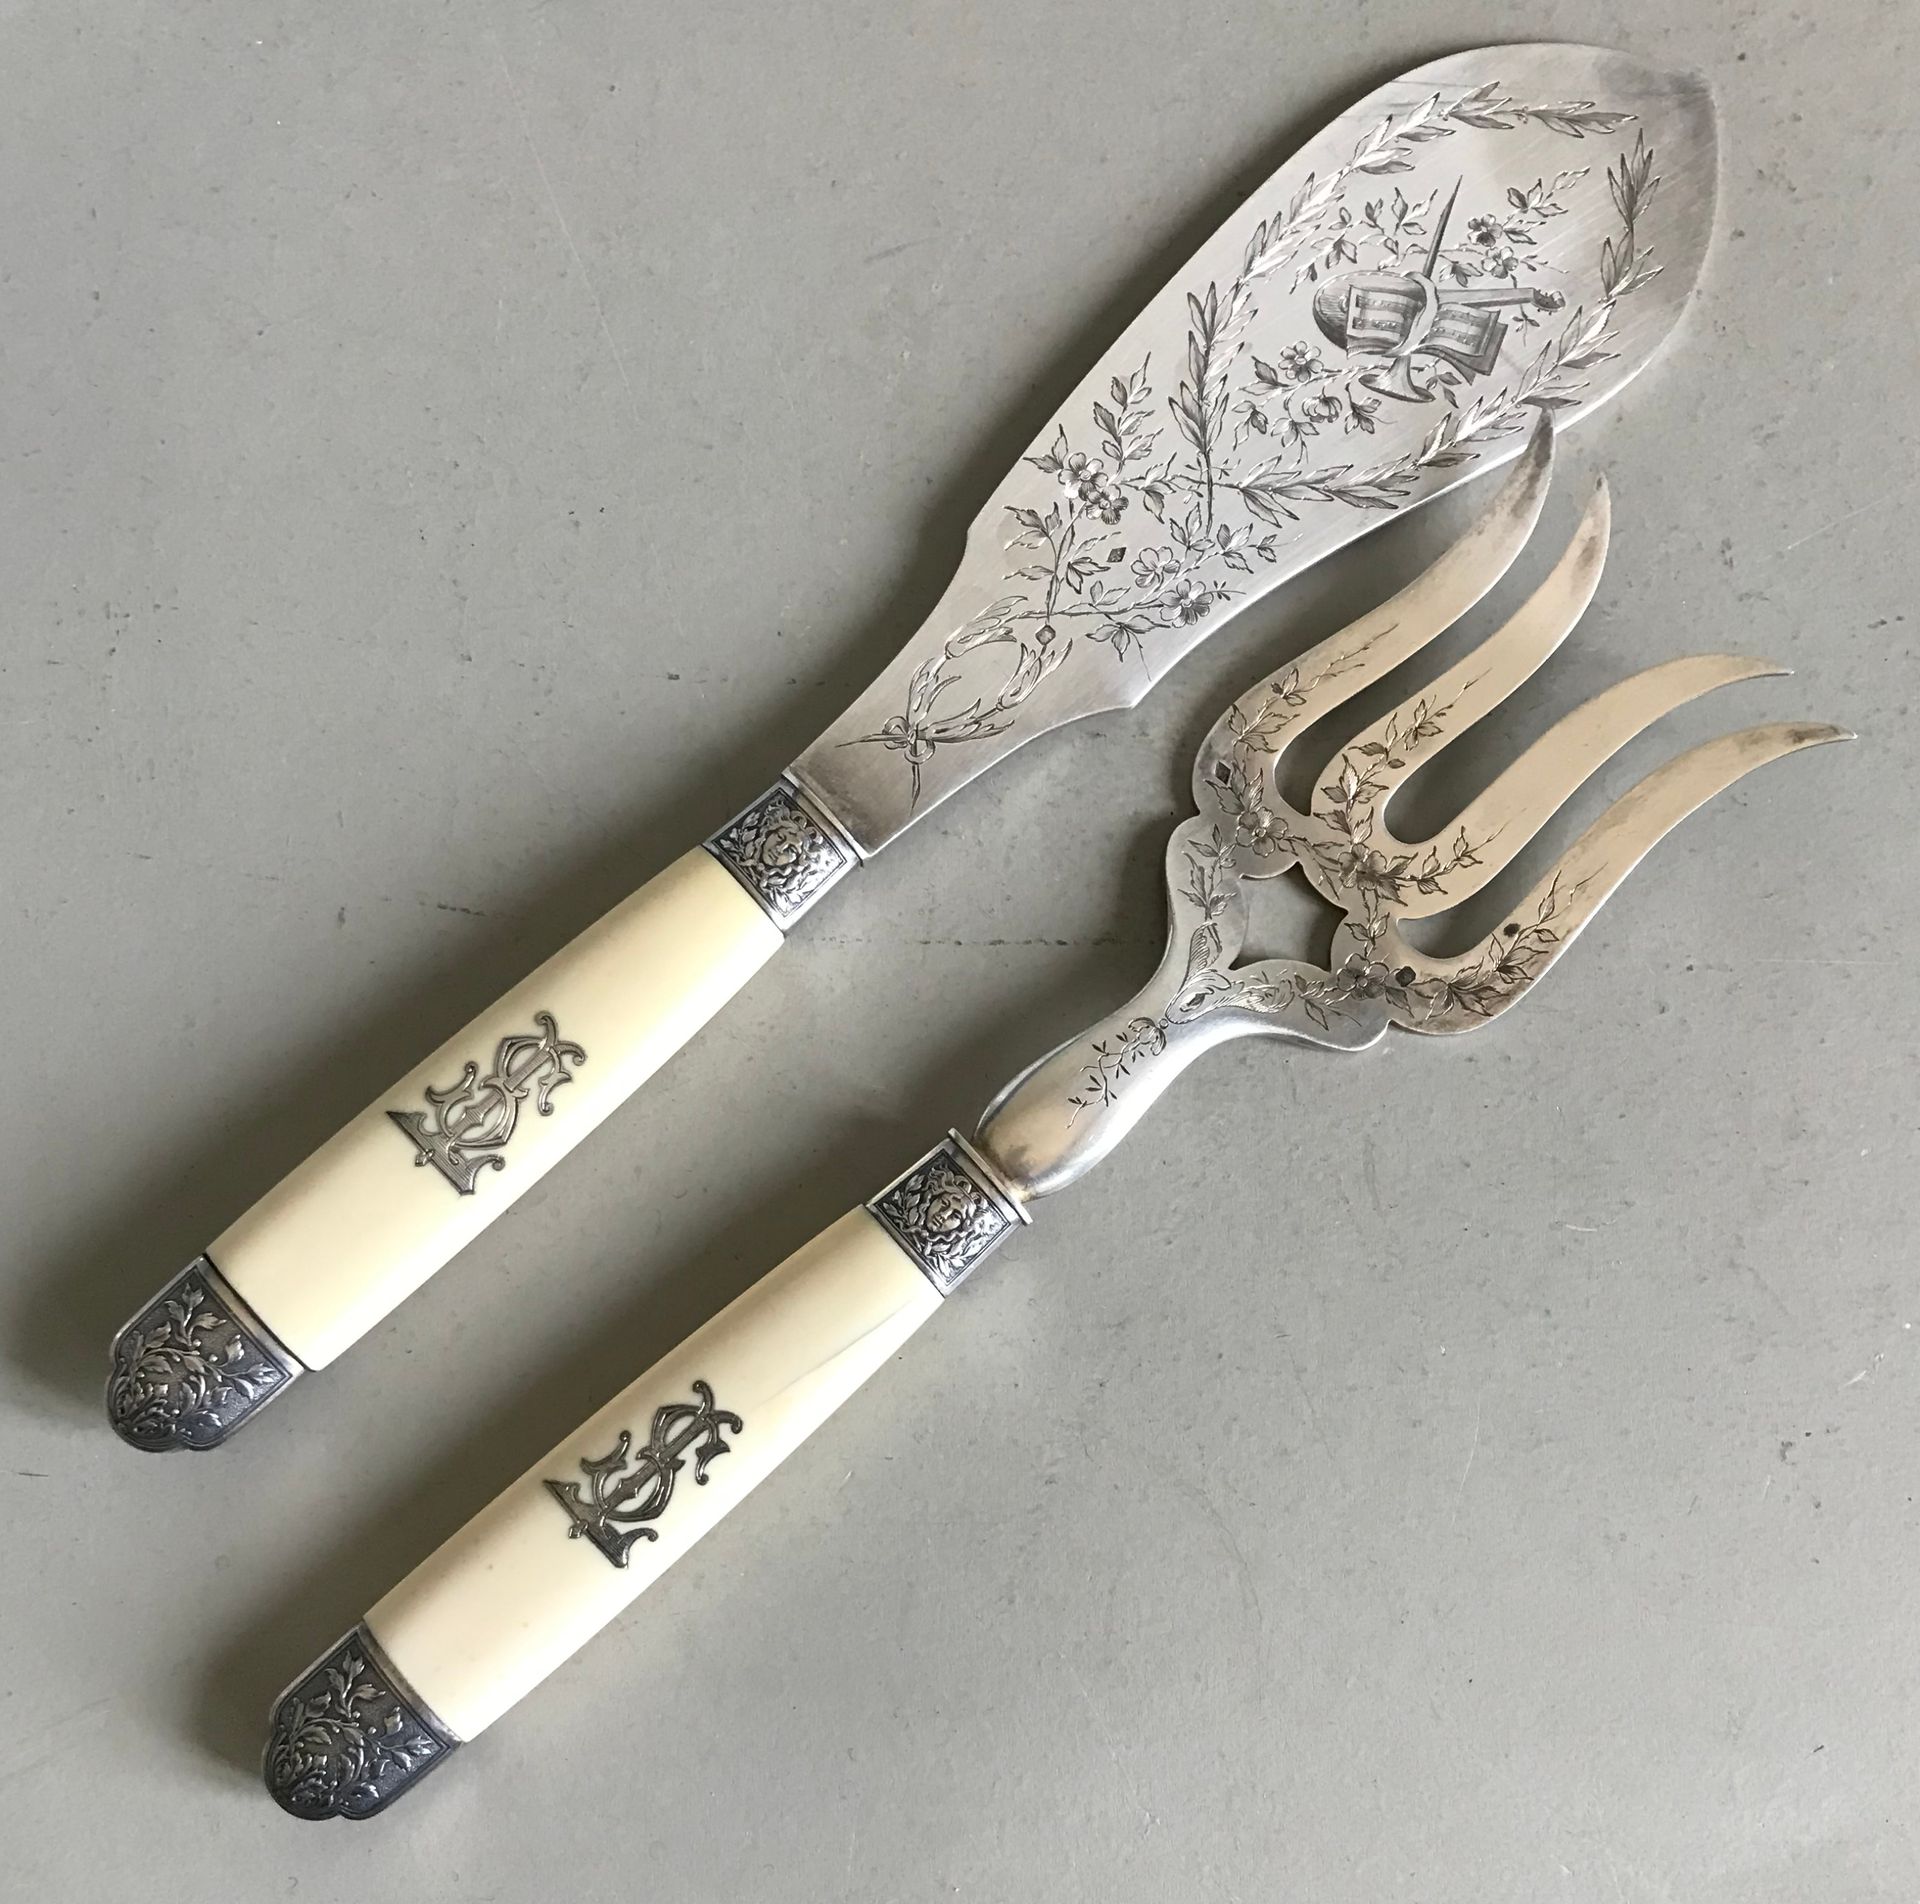 KELLER House of KELLER

Silver fish service cutlery with chased flowers. Ivory h&hellip;